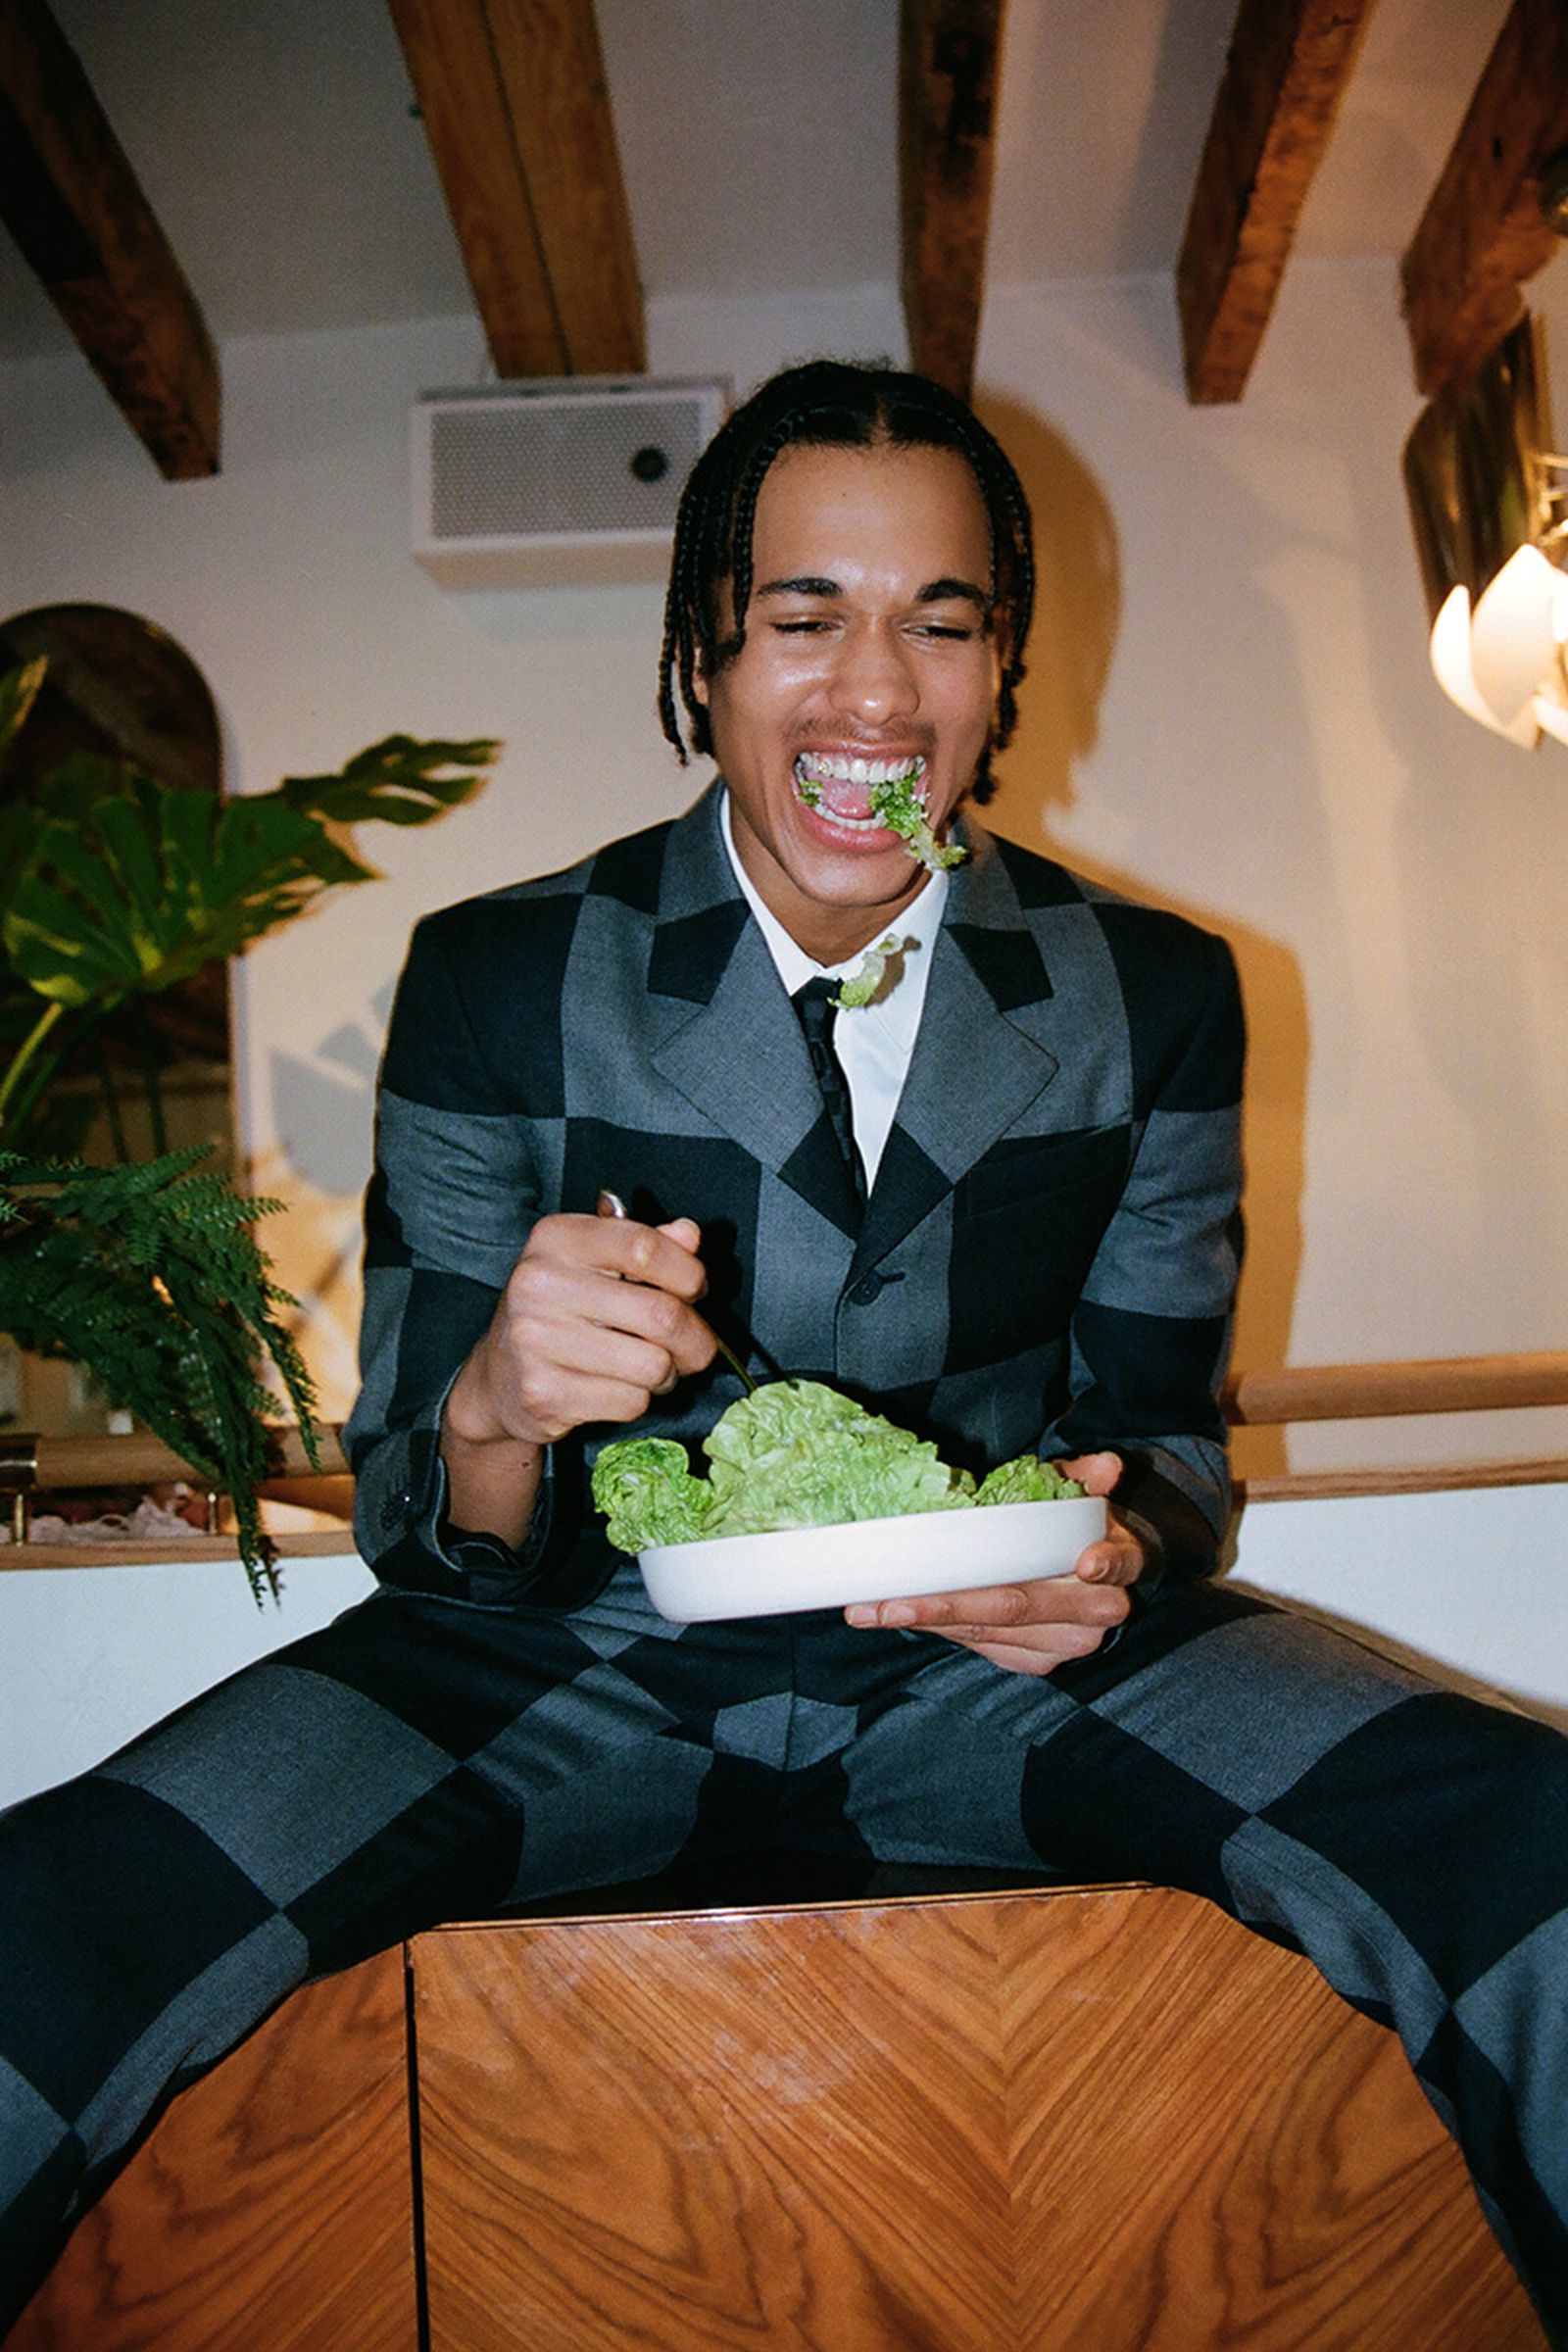 the-last-brunch-with-virgil-nigo-and-louis-vuitton-13